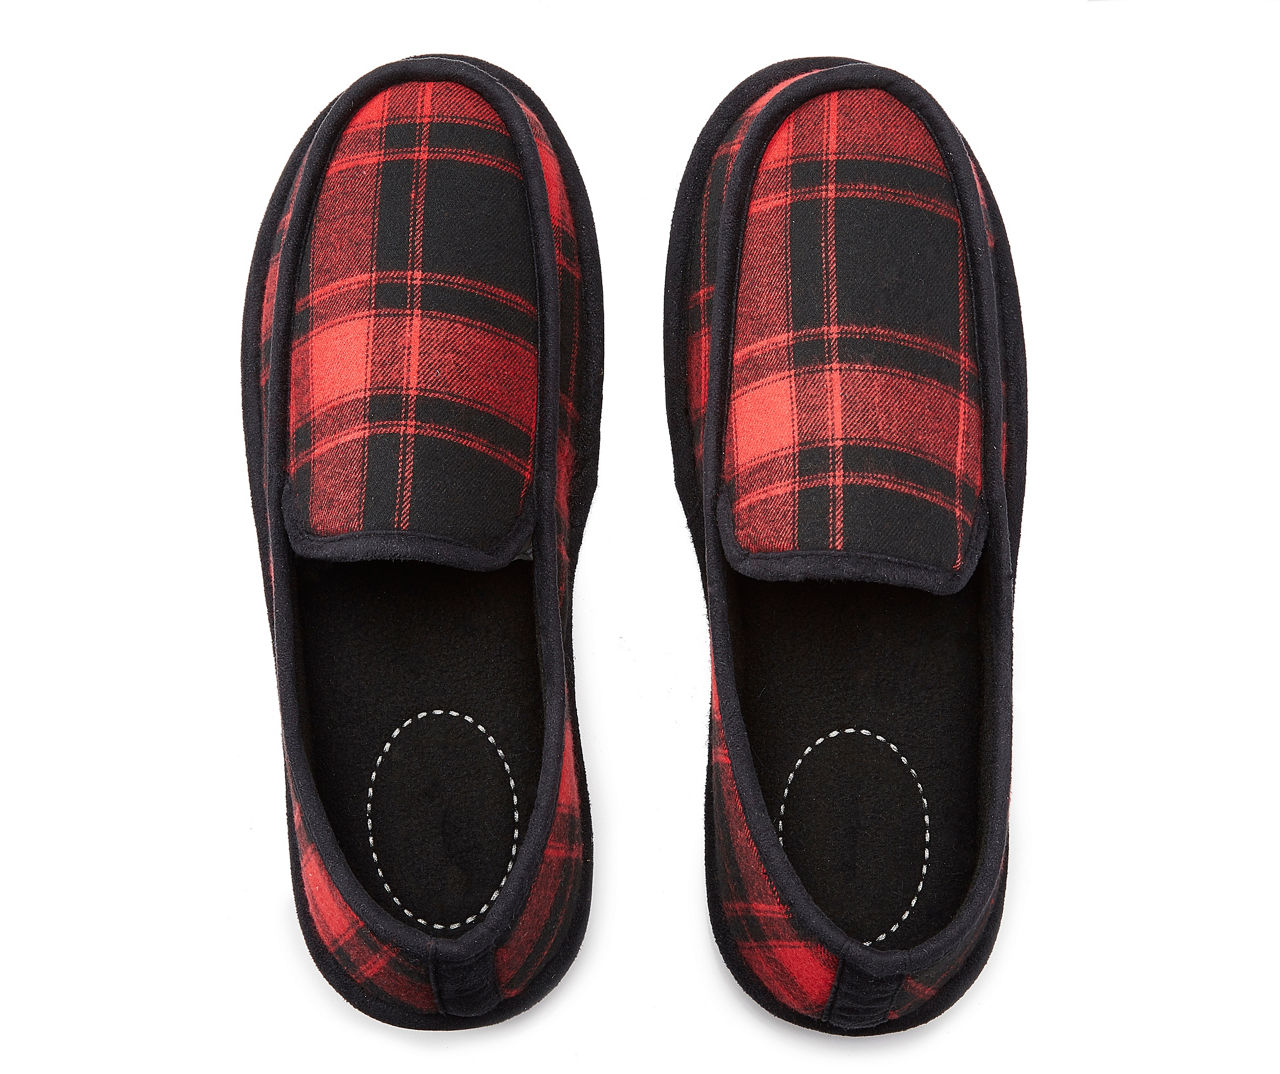 Men's Black & Red Plaid Moccasin Slippers, Size L